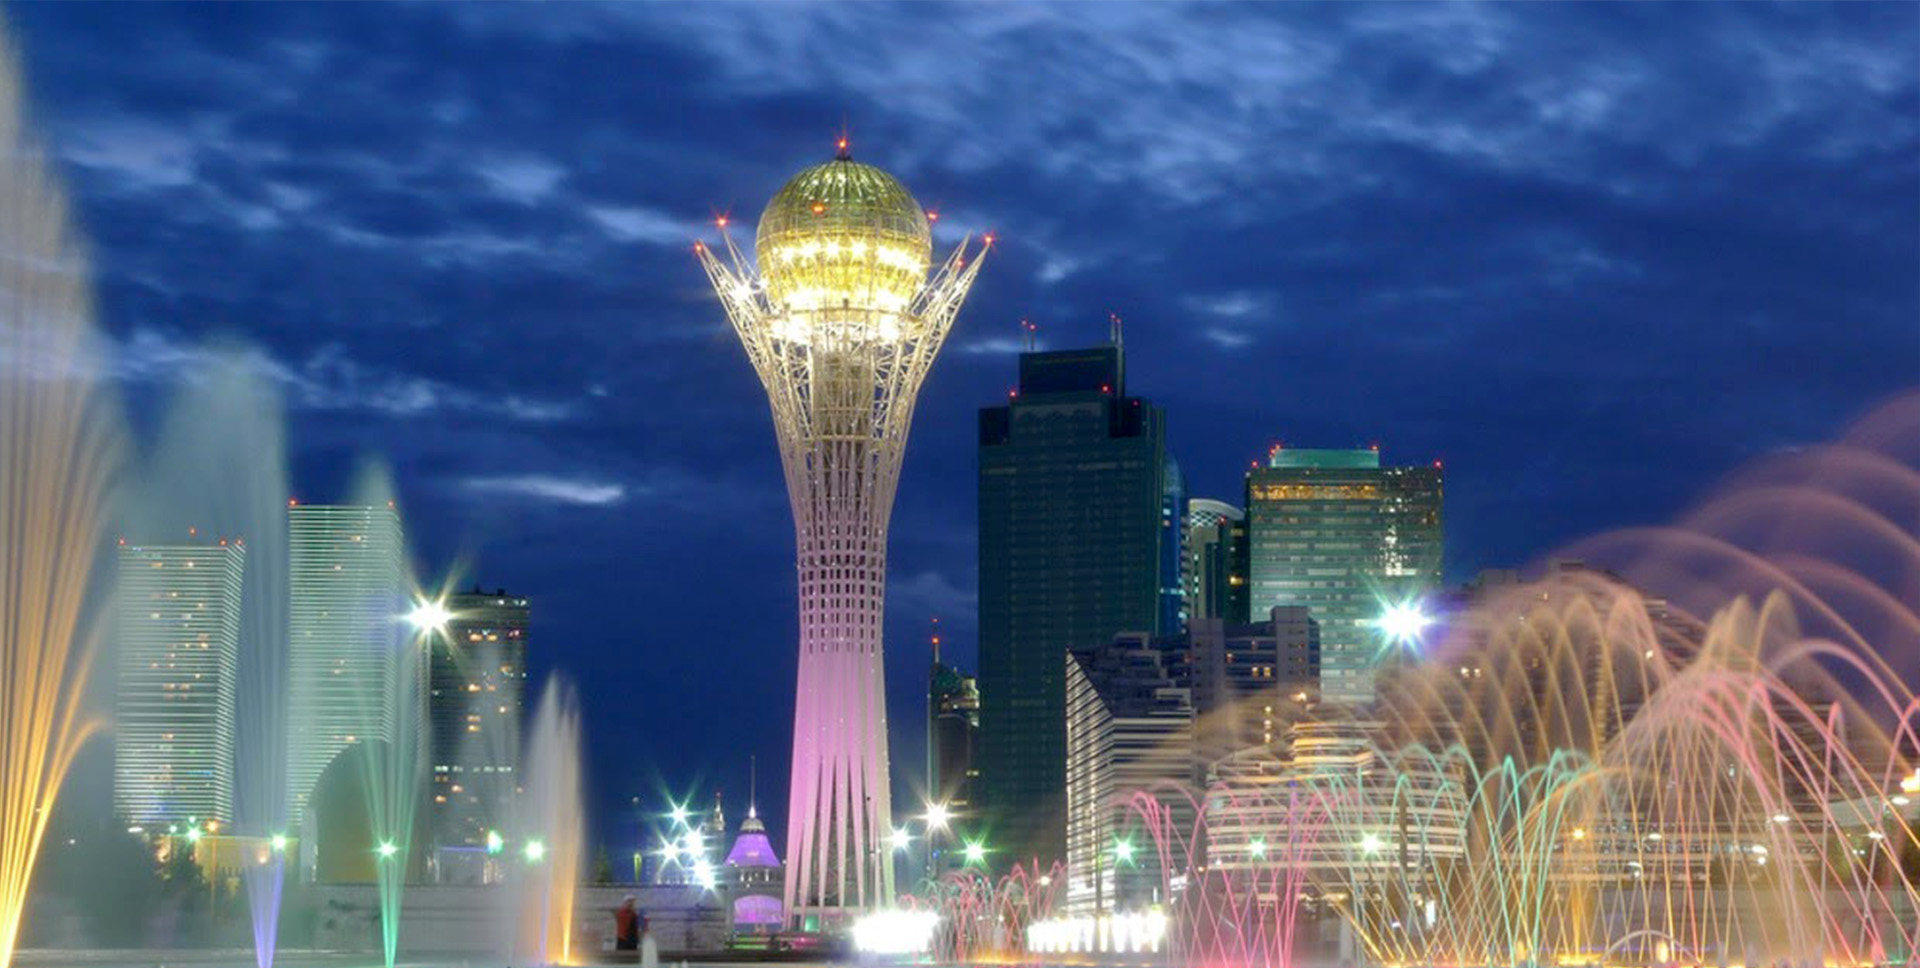 Do you know the sights of Kazakhstan?